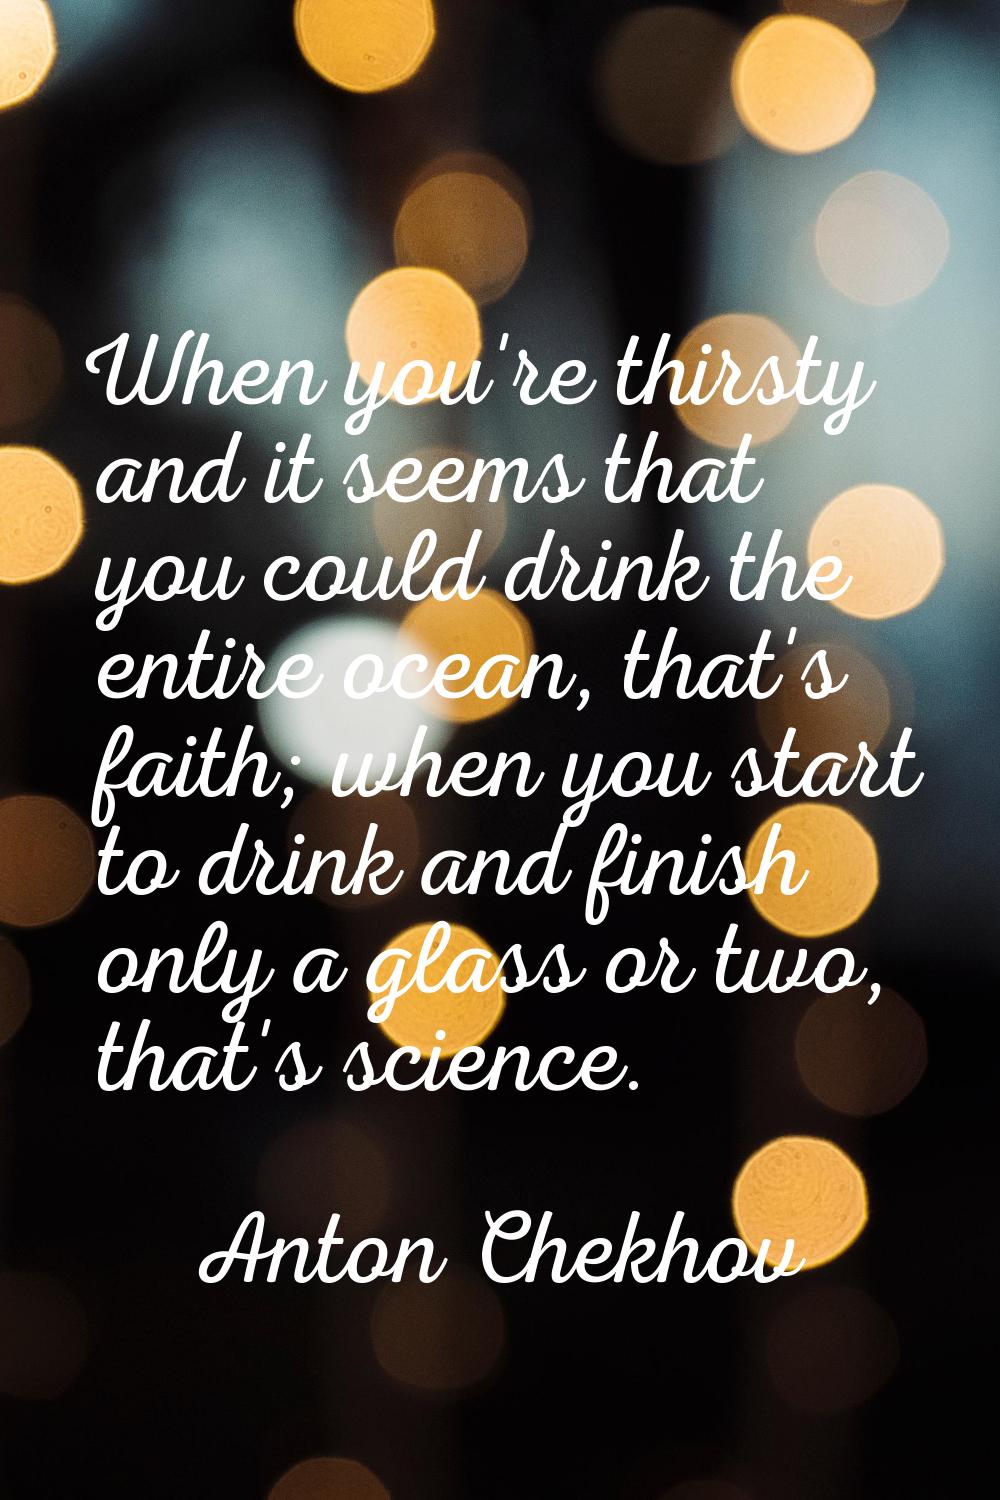 When you're thirsty and it seems that you could drink the entire ocean, that's faith; when you star